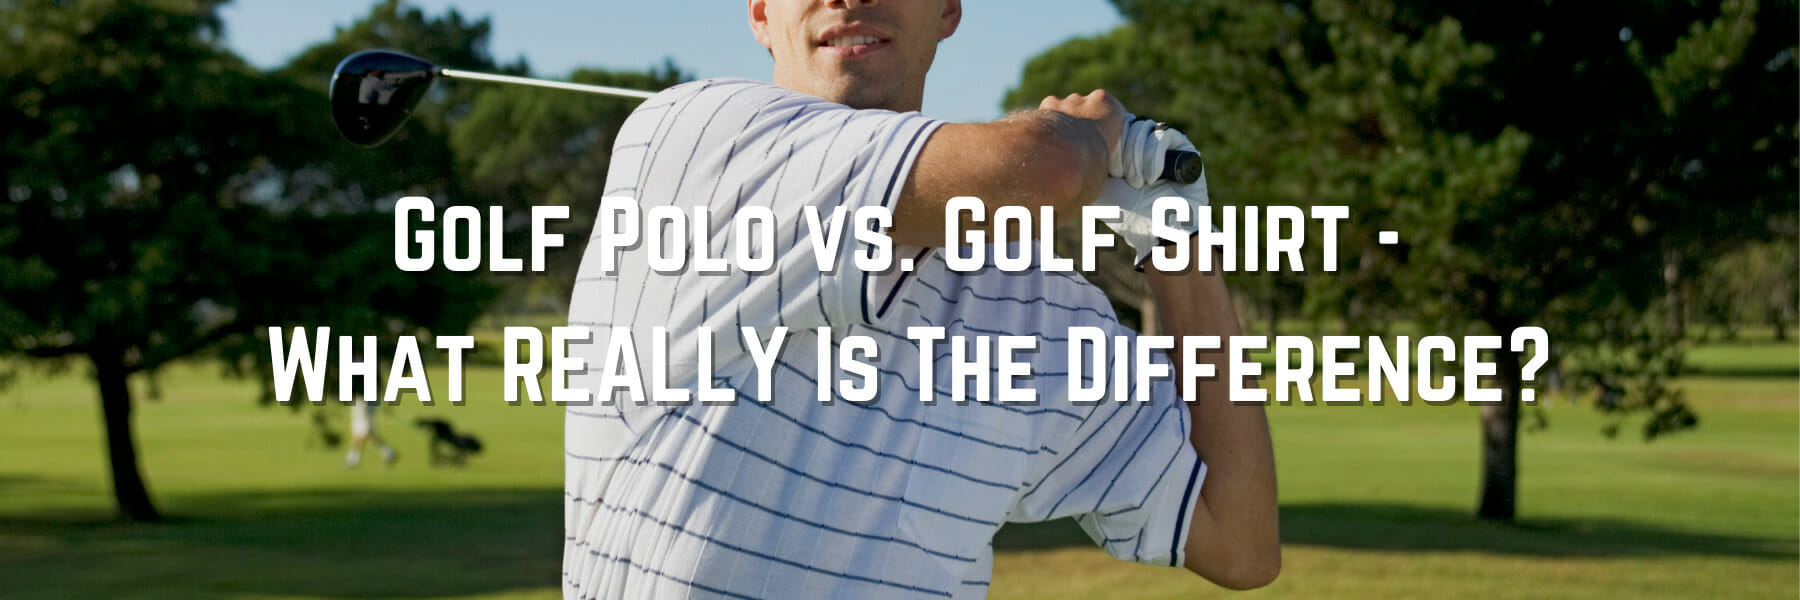 Golf Polo vs. Golf Shirt - What REALLY Is The Difference?